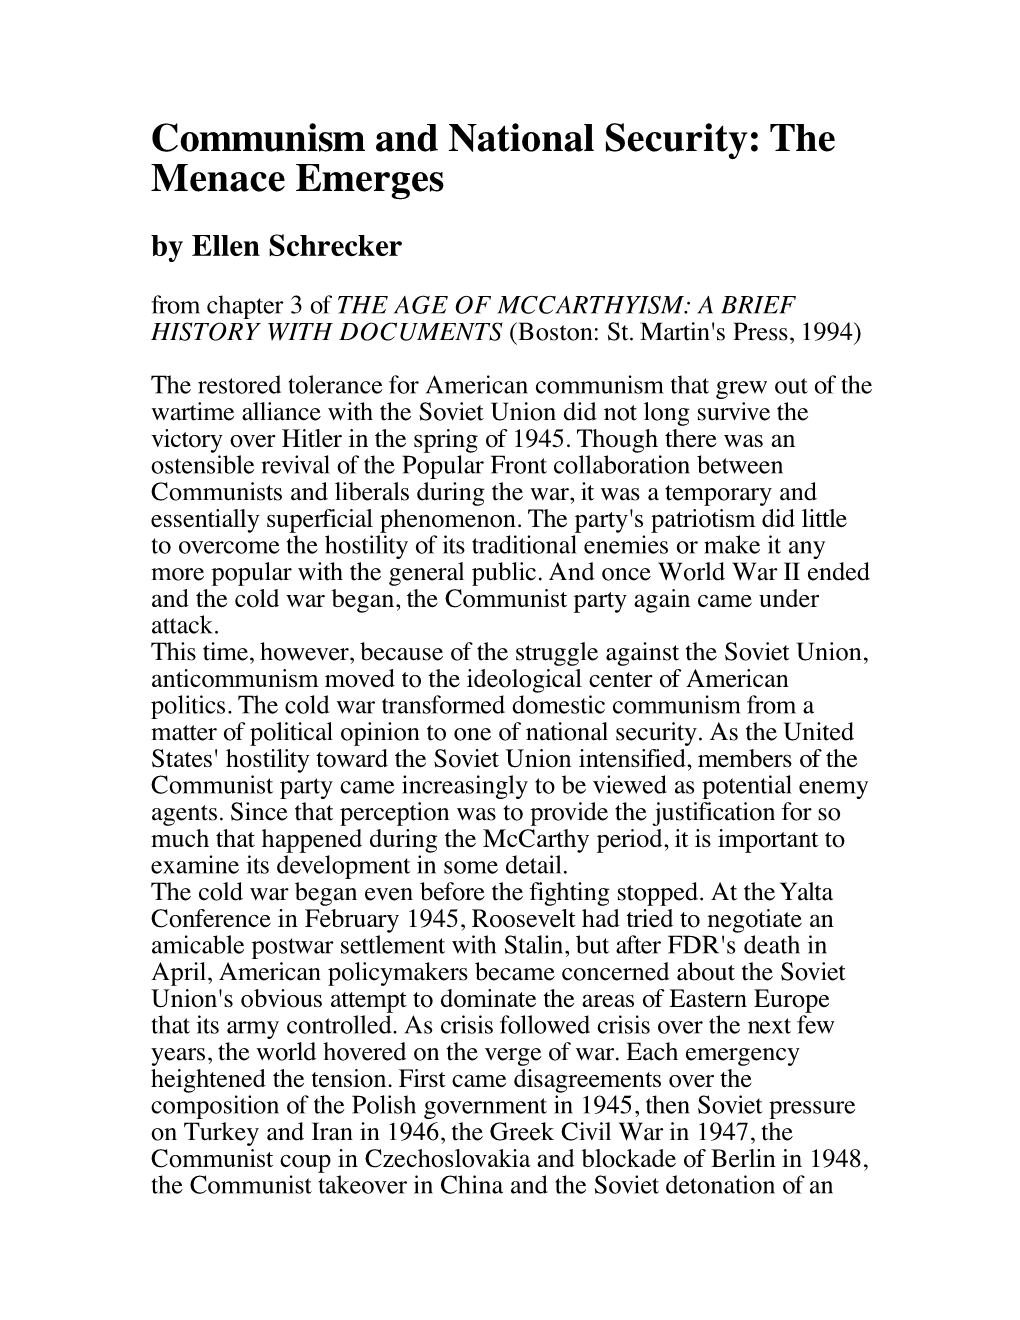 Communism and National Security: the Menace Emerges by Ellen Schrecker from Chapter 3 of the AGE of MCCARTHYISM: a BRIEF HISTORY with DOCUMENTS (Boston: St